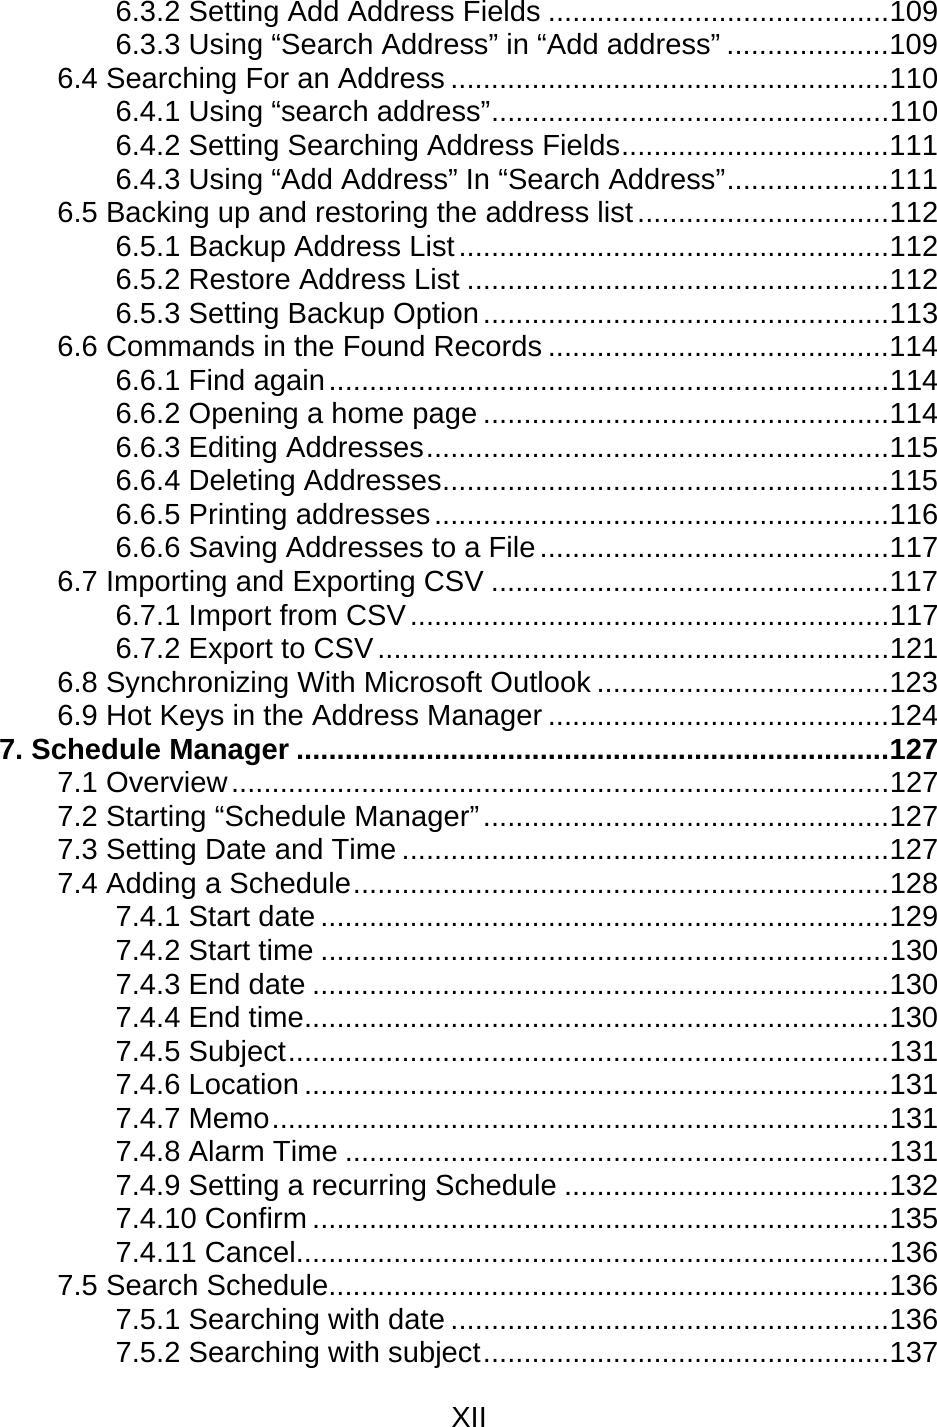 XII  6.3.2 Setting Add Address Fields ..........................................109 6.3.3 Using “Search Address” in “Add address” ....................109 6.4 Searching For an Address ......................................................110 6.4.1 Using “search address”.................................................110 6.4.2 Setting Searching Address Fields.................................111 6.4.3 Using “Add Address” In “Search Address”....................111 6.5 Backing up and restoring the address list...............................112 6.5.1 Backup Address List.....................................................112 6.5.2 Restore Address List ....................................................112 6.5.3 Setting Backup Option..................................................113 6.6 Commands in the Found Records ..........................................114 6.6.1 Find again.....................................................................114 6.6.2 Opening a home page ..................................................114 6.6.3 Editing Addresses.........................................................115 6.6.4 Deleting Addresses.......................................................115 6.6.5 Printing addresses........................................................116 6.6.6 Saving Addresses to a File...........................................117 6.7 Importing and Exporting CSV .................................................117 6.7.1 Import from CSV...........................................................117 6.7.2 Export to CSV...............................................................121 6.8 Synchronizing With Microsoft Outlook ....................................123 6.9 Hot Keys in the Address Manager ..........................................124 7. Schedule Manager .........................................................................127 7.1 Overview.................................................................................127 7.2 Starting “Schedule Manager”..................................................127 7.3 Setting Date and Time ............................................................127 7.4 Adding a Schedule..................................................................128 7.4.1 Start date ......................................................................129 7.4.2 Start time ......................................................................130 7.4.3 End date .......................................................................130 7.4.4 End time........................................................................130 7.4.5 Subject..........................................................................131 7.4.6 Location ........................................................................131 7.4.7 Memo............................................................................131 7.4.8 Alarm Time ...................................................................131 7.4.9 Setting a recurring Schedule ........................................132 7.4.10 Confirm .......................................................................135 7.4.11 Cancel.........................................................................136 7.5 Search Schedule.....................................................................136 7.5.1 Searching with date ......................................................136 7.5.2 Searching with subject..................................................137 